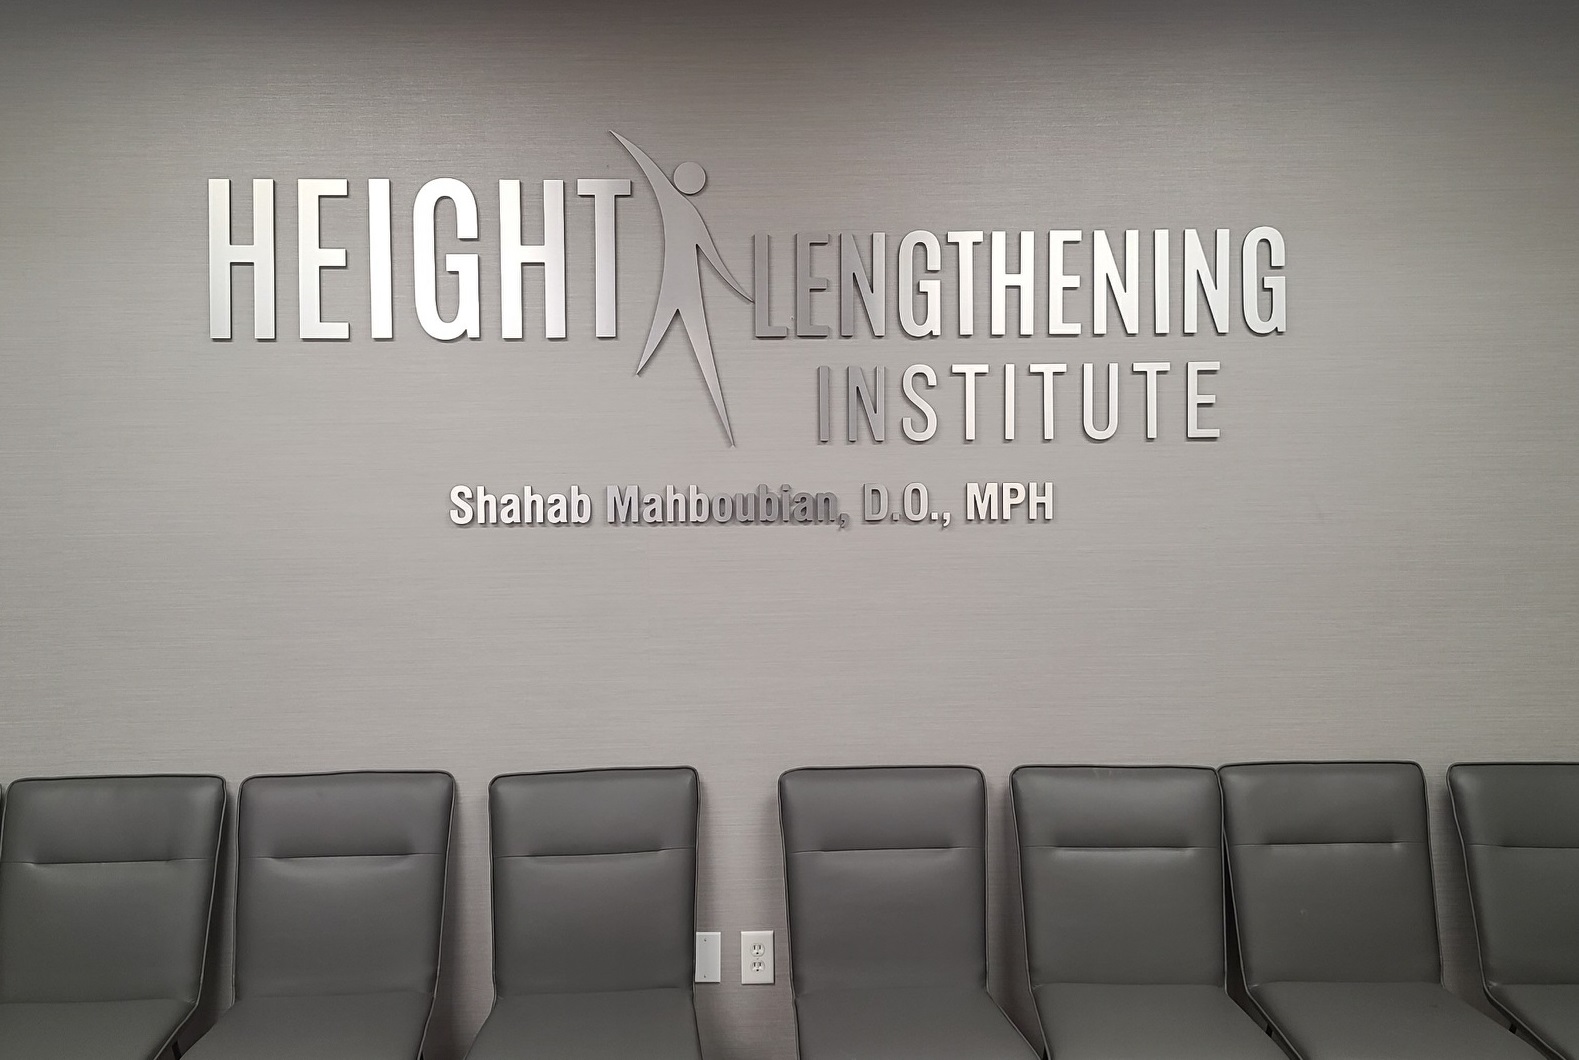 Our clinic lobby sign for the Height Lengthening Institute in Burbank enhances their office and makes the brand more visible to visiting patients.